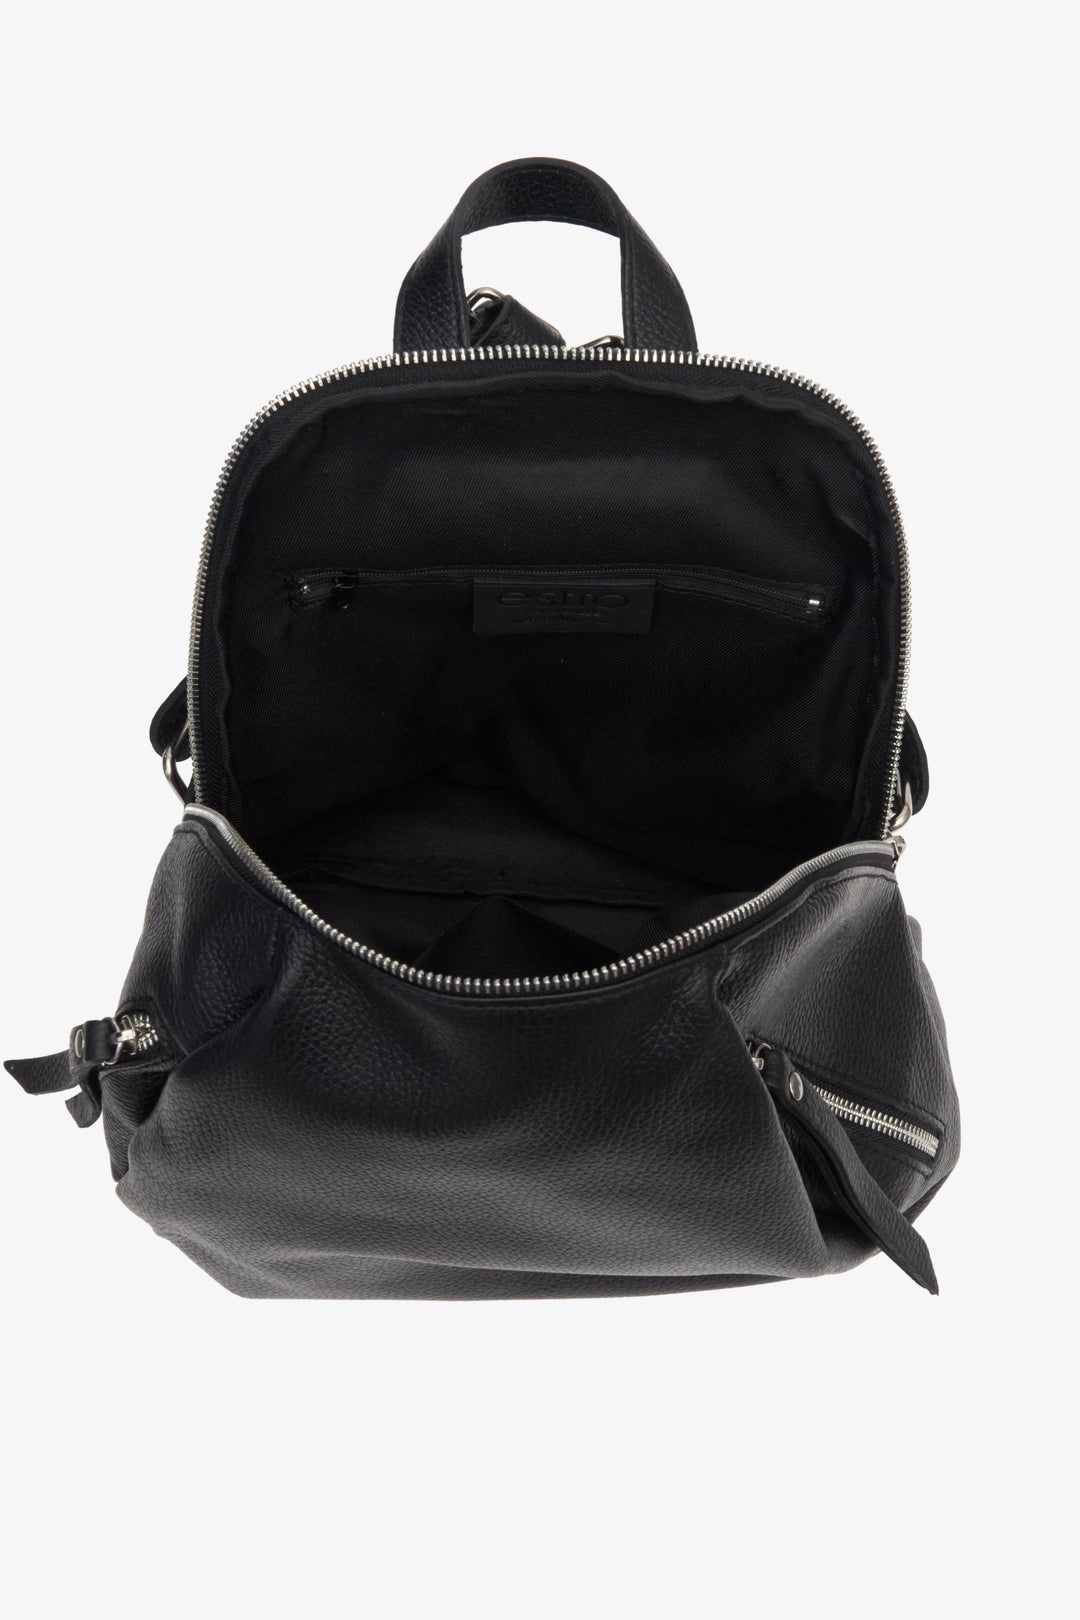 Women's black leather backpack with silver accents - close-up on the lining.